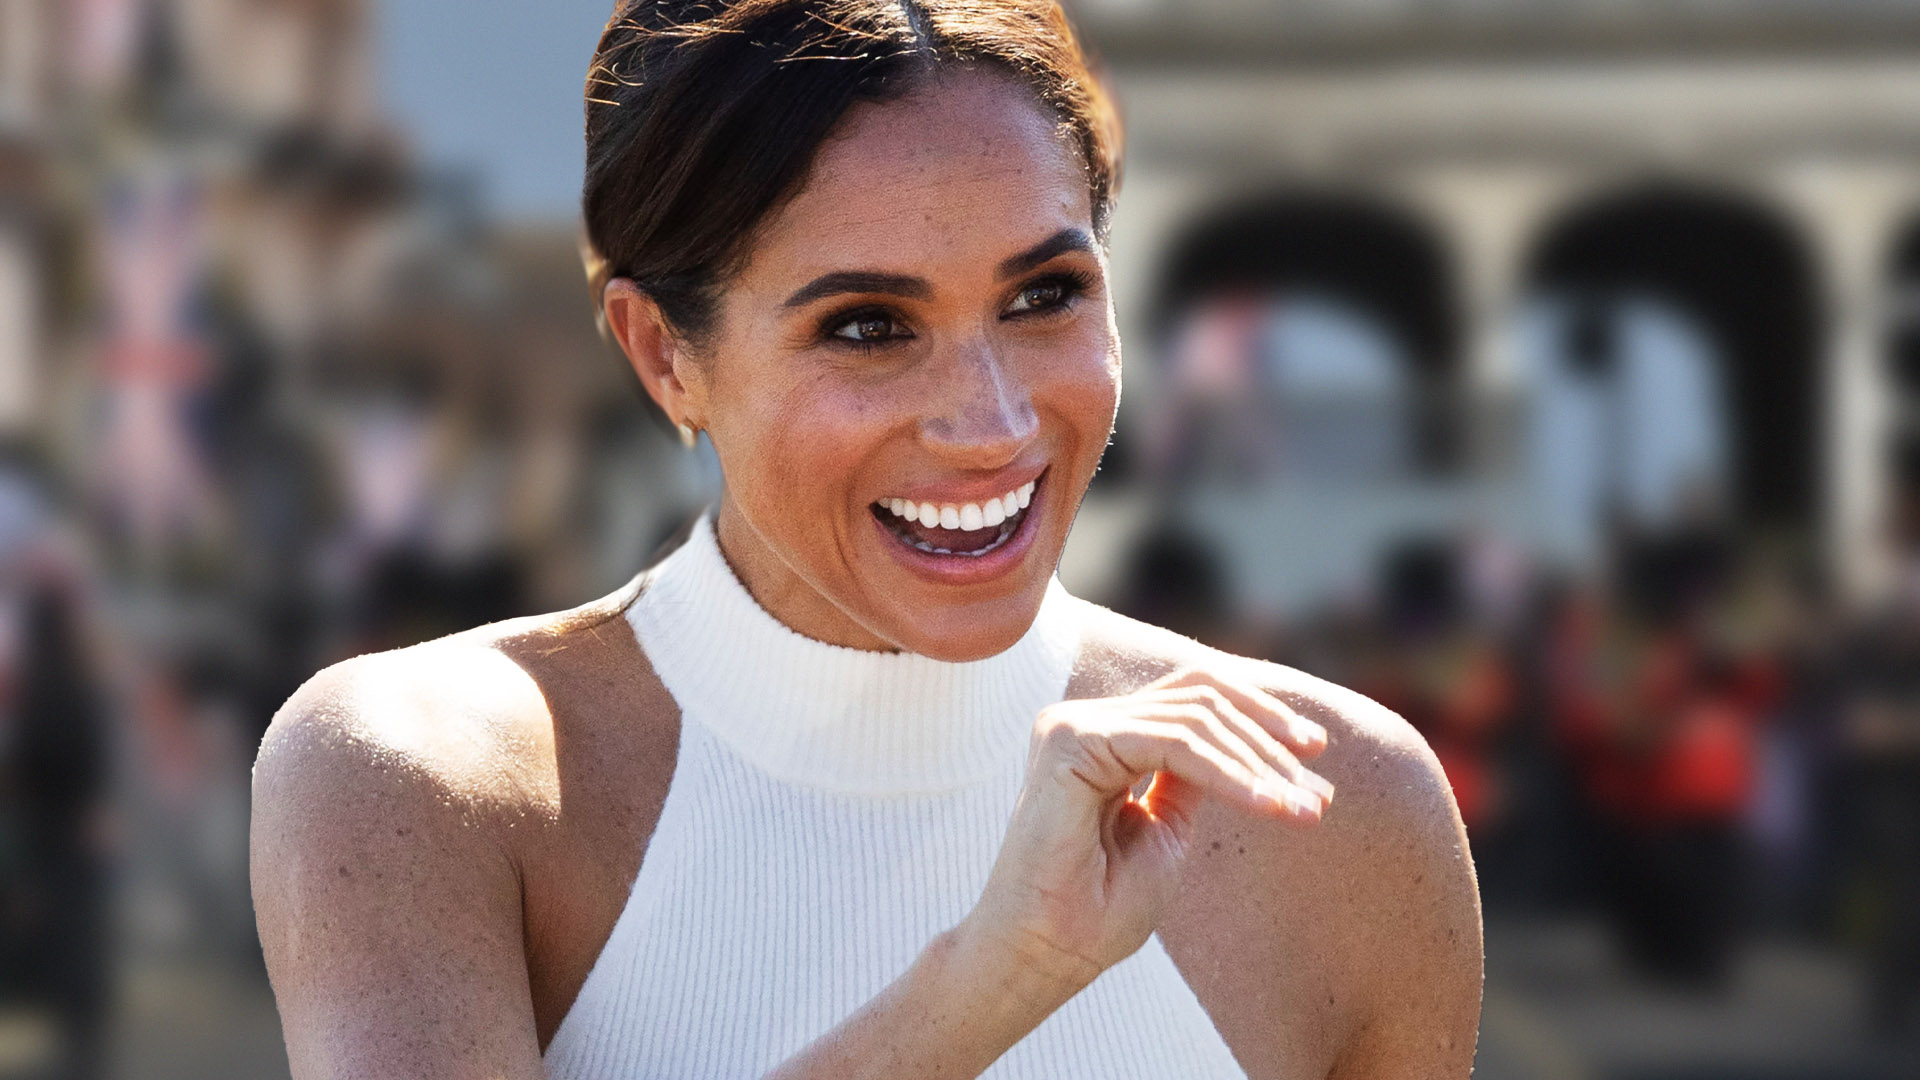 Will We Ever See Meghan Markle Attending Another Royal Event?